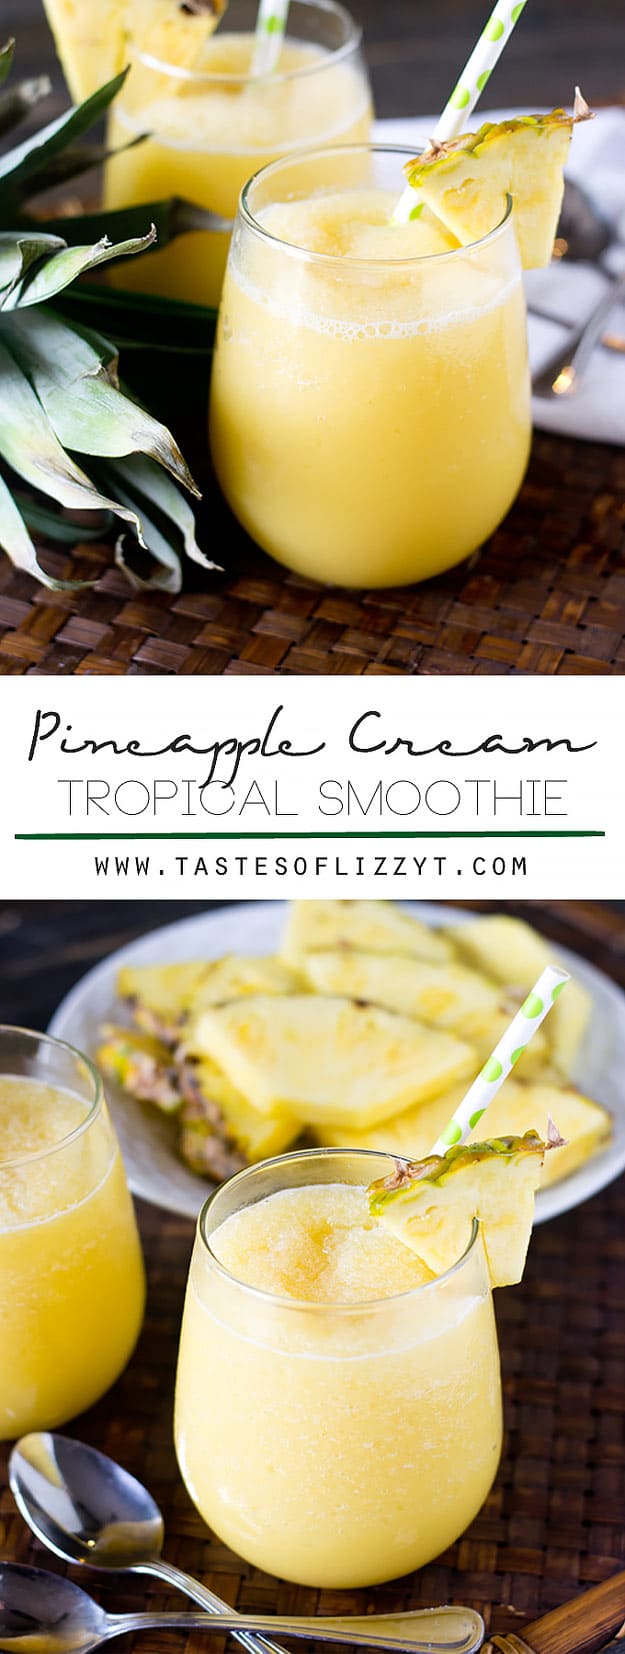 Healthy smoothie recipes and easy ideas perfect for breakfast, energy. Low calorie and high protein recipes for weightloss and to lose weight. Simple homemade recipe ideas that kids love. | Pineapple Cream Tropical Smoothie #smoothies #recipess